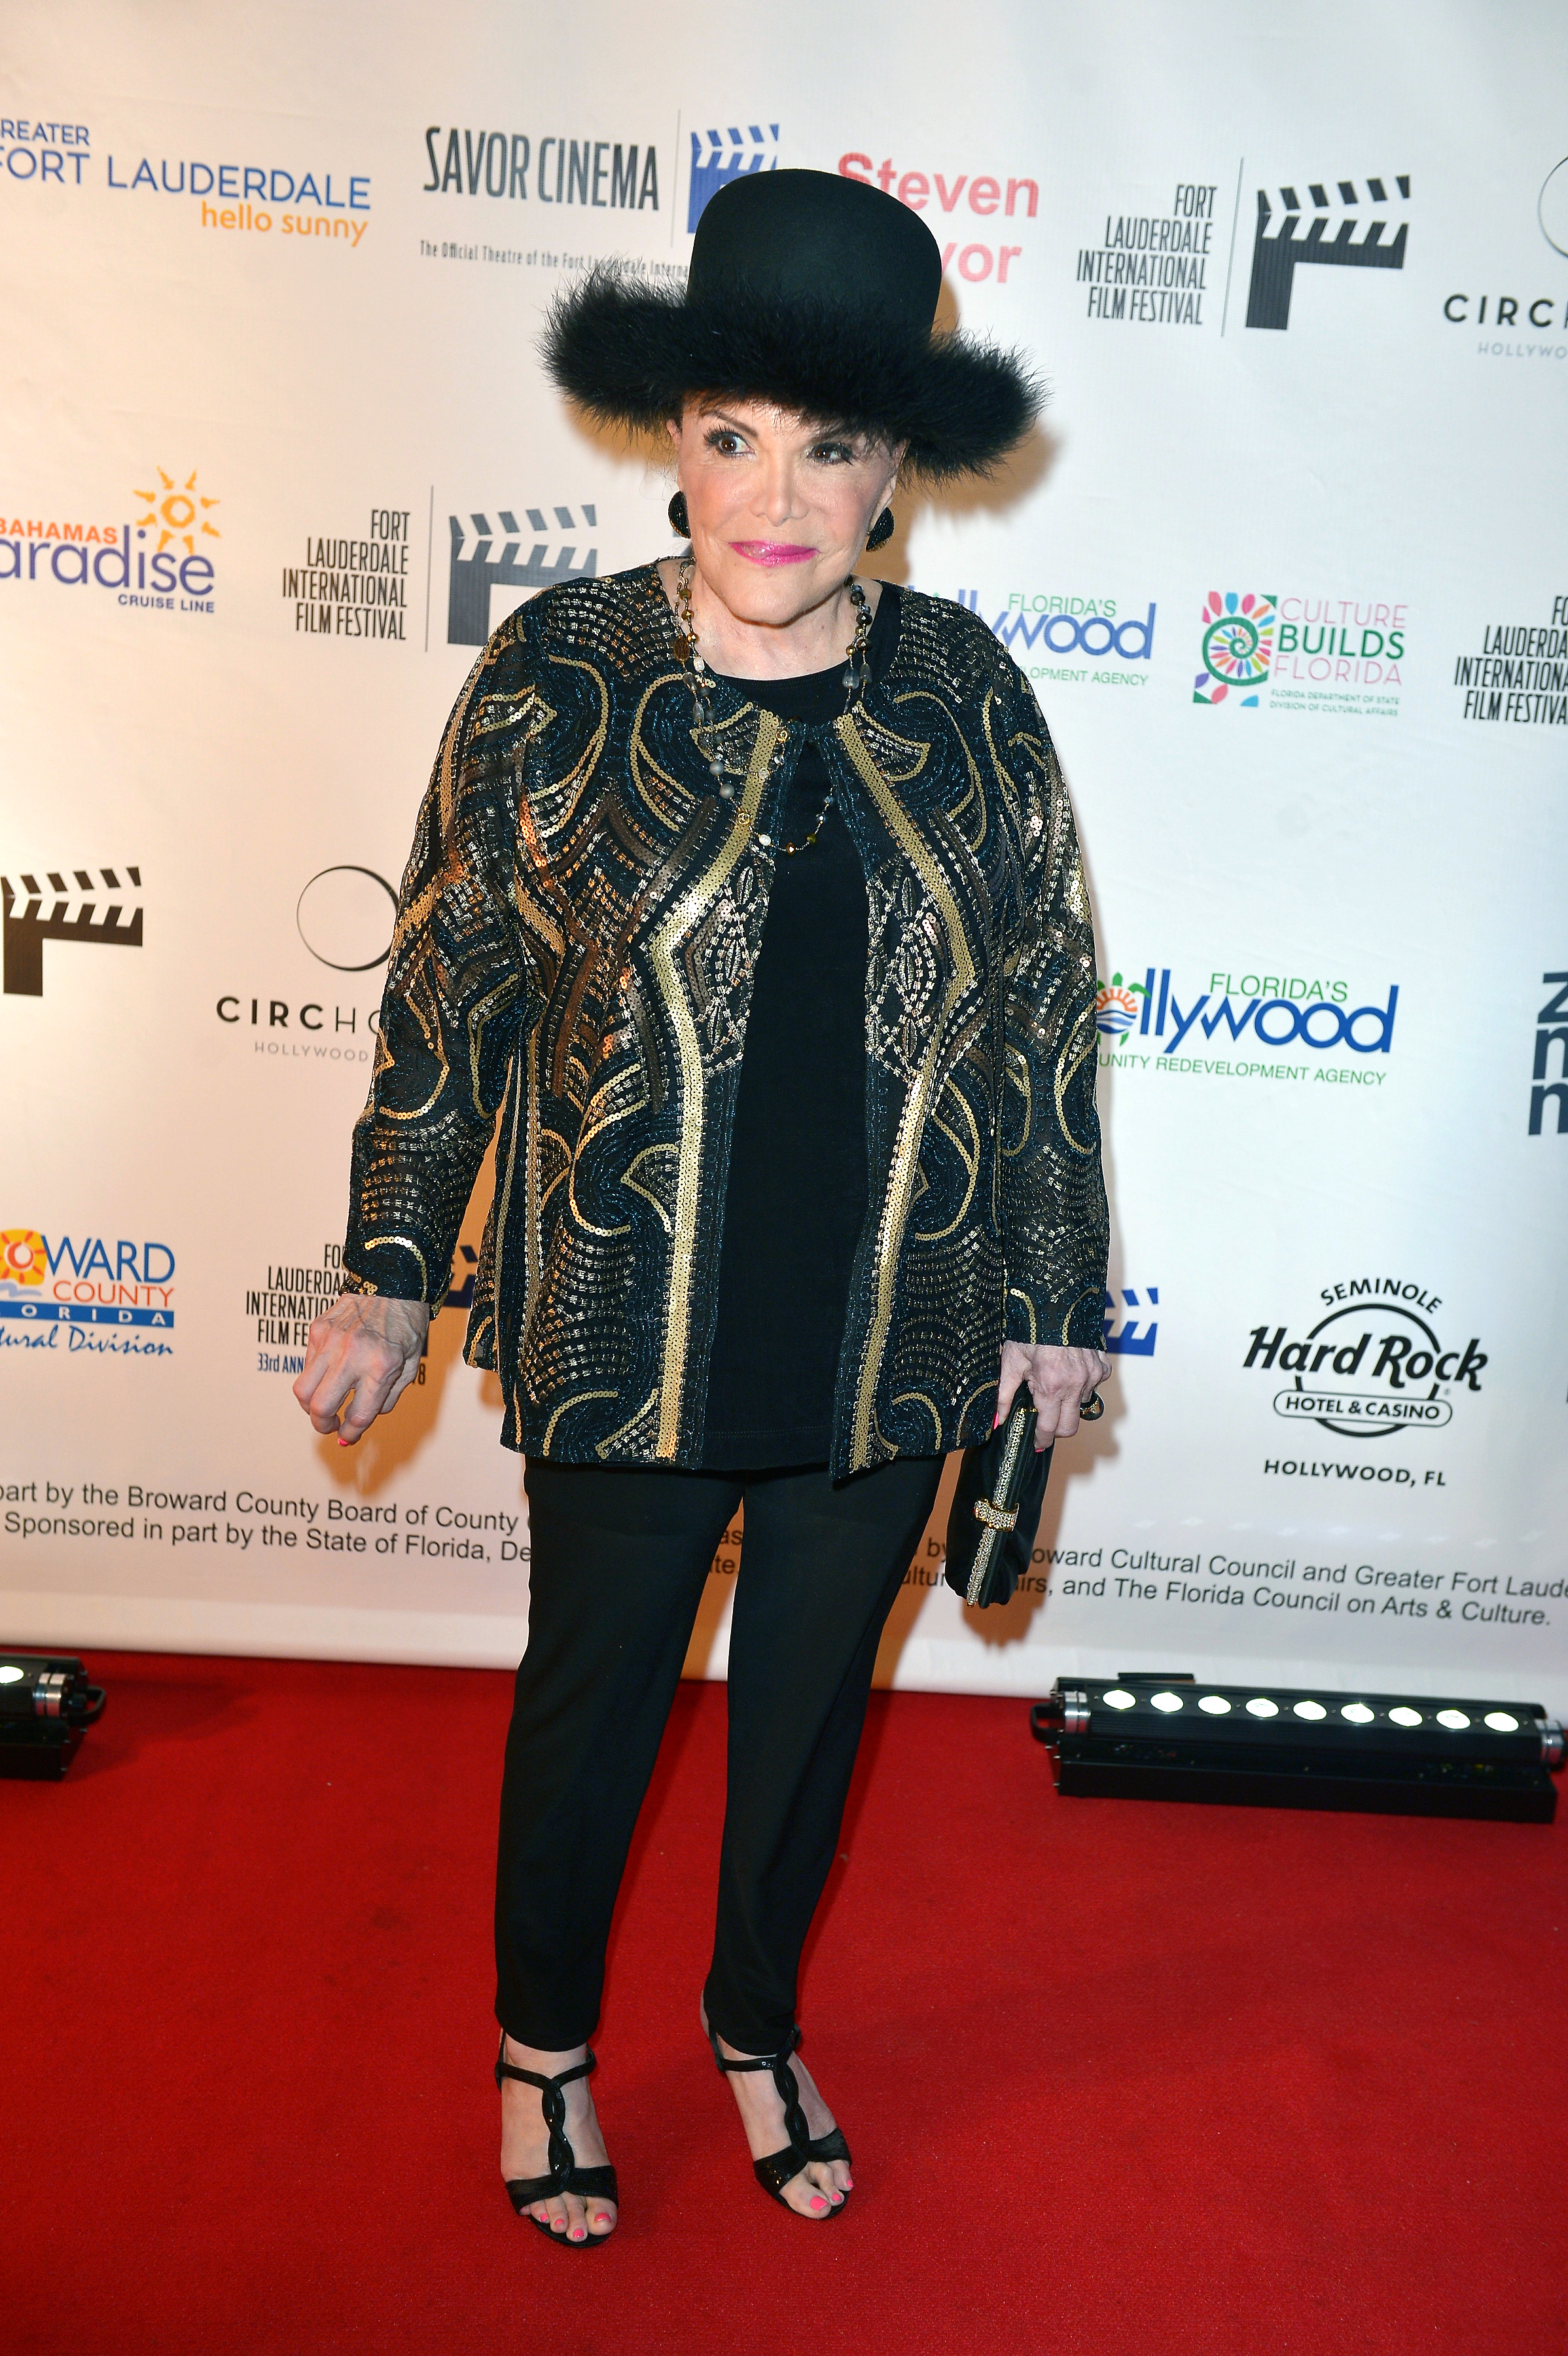 Connie Francis at the 33rd Fort Lauderdale International Film Festival "Where The Boys Are" screening on November 7, 2018, in Fort Lauderdale, Florida | Source: Getty Images